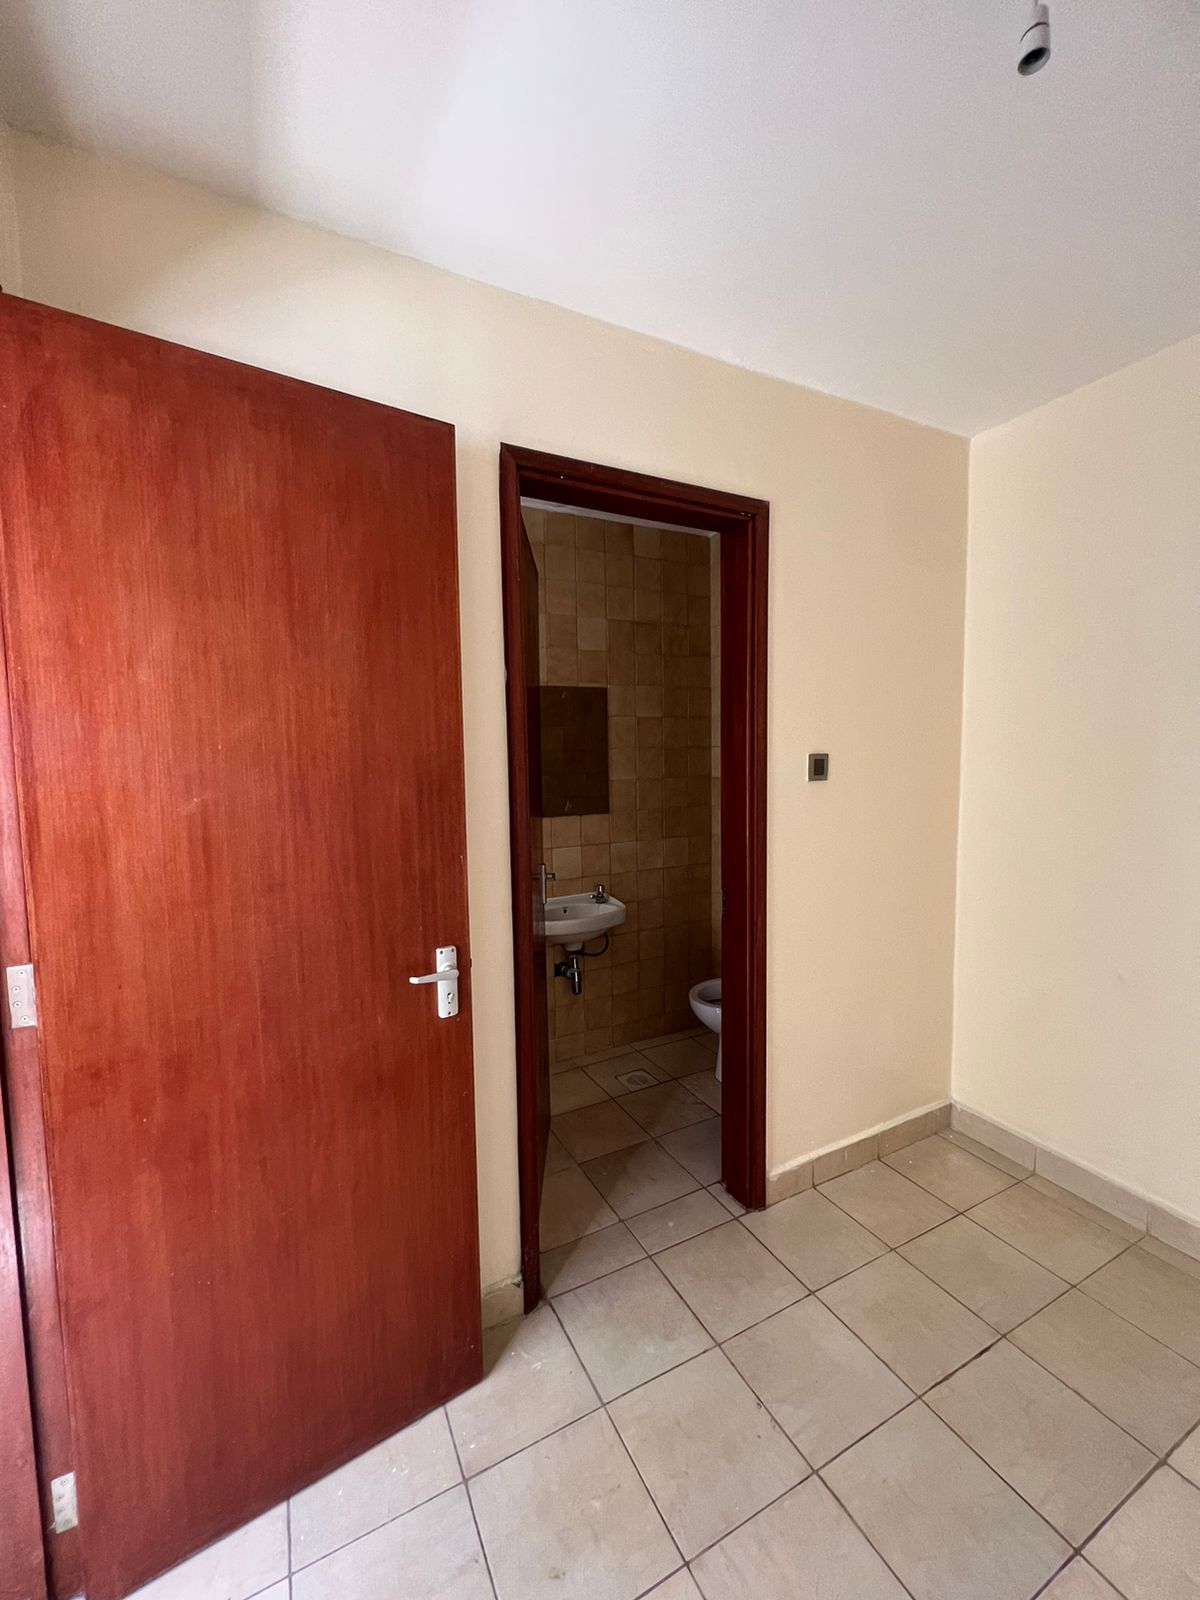 3 bedroom apartment to let in Riverside, Nairobi. All bedrooms en suite, dsq available, back up generator, kids playing area. Rent per month 200,000. Musilli Homes